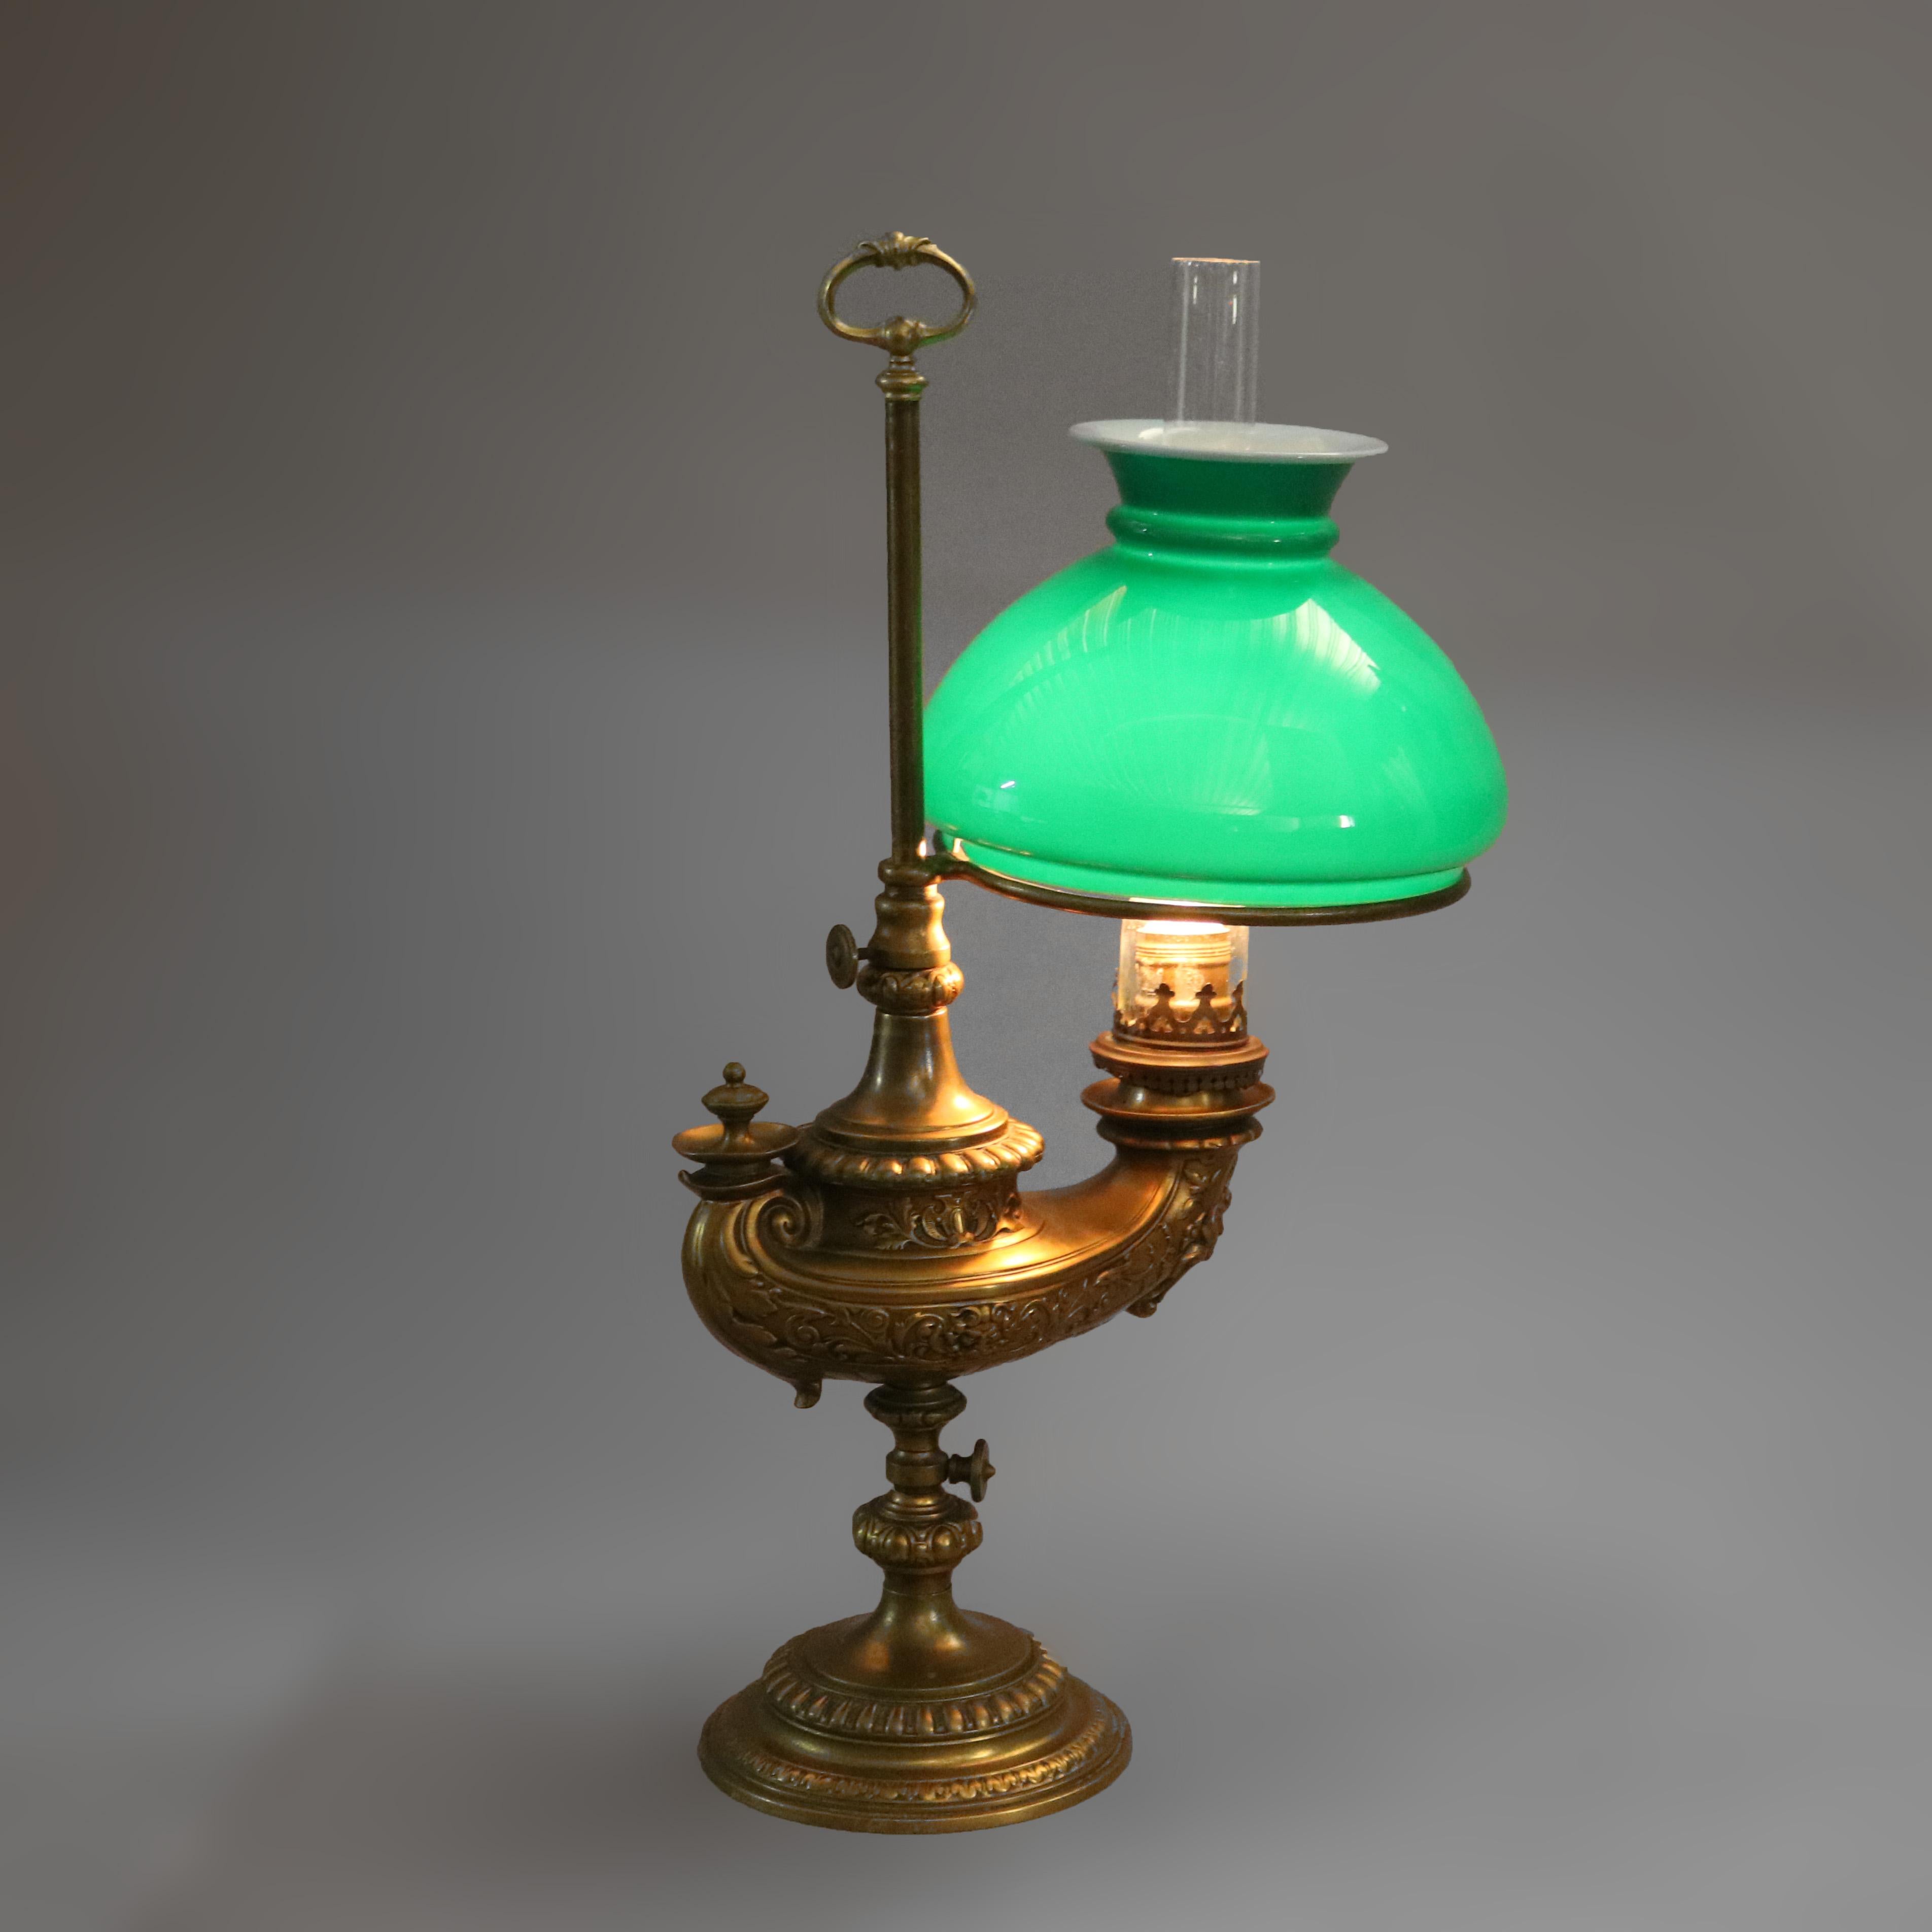 Brass Antique Harvard Student Lamp with Emeralite Shade Alladin Lamp Form 19th Century